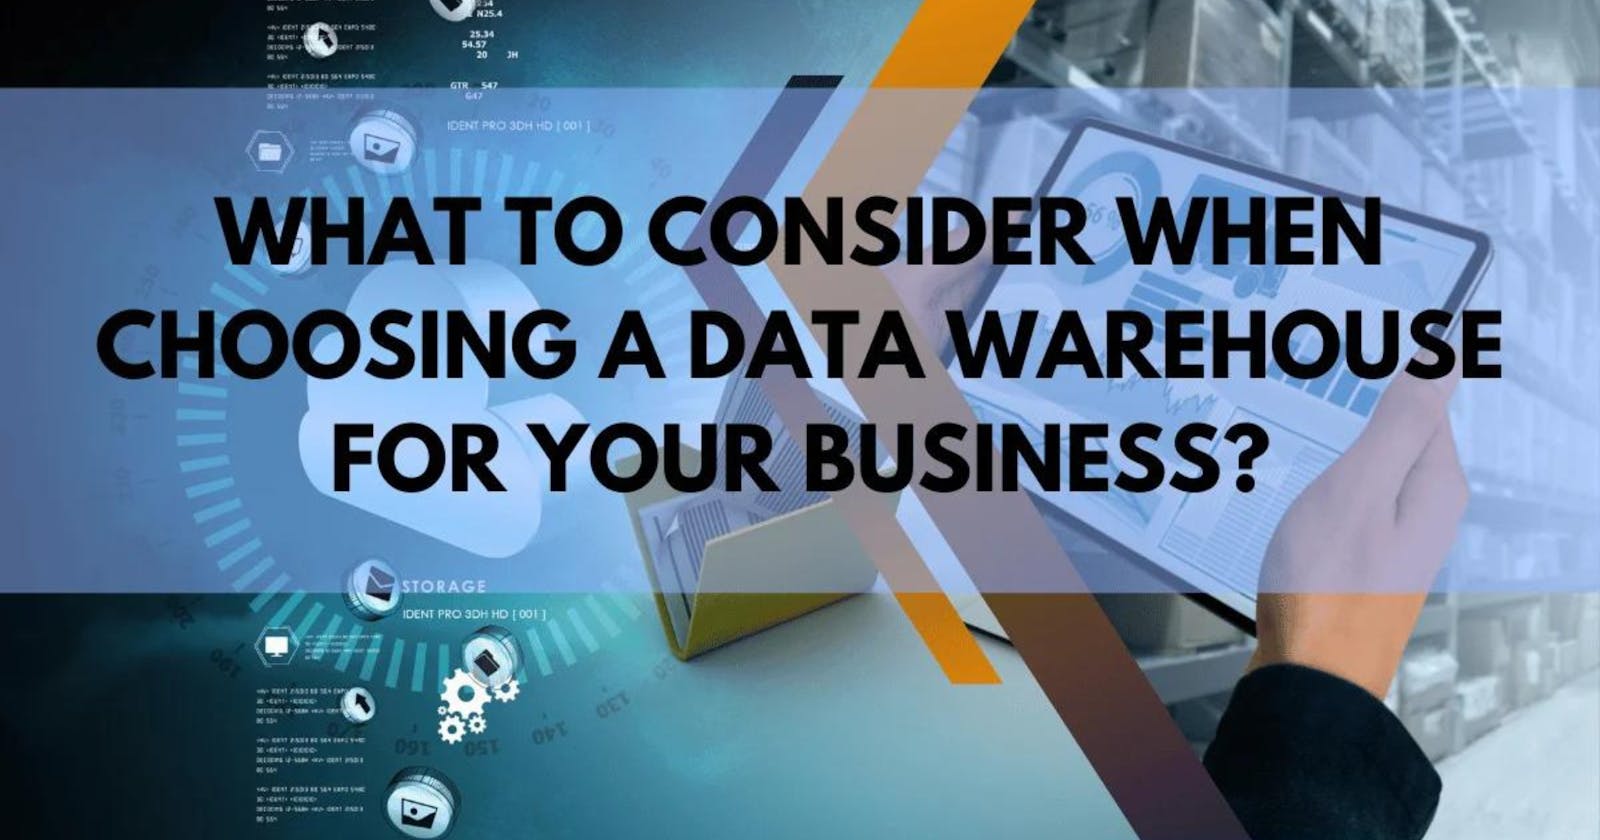 Points to Consider While Choosing Data Warehouse